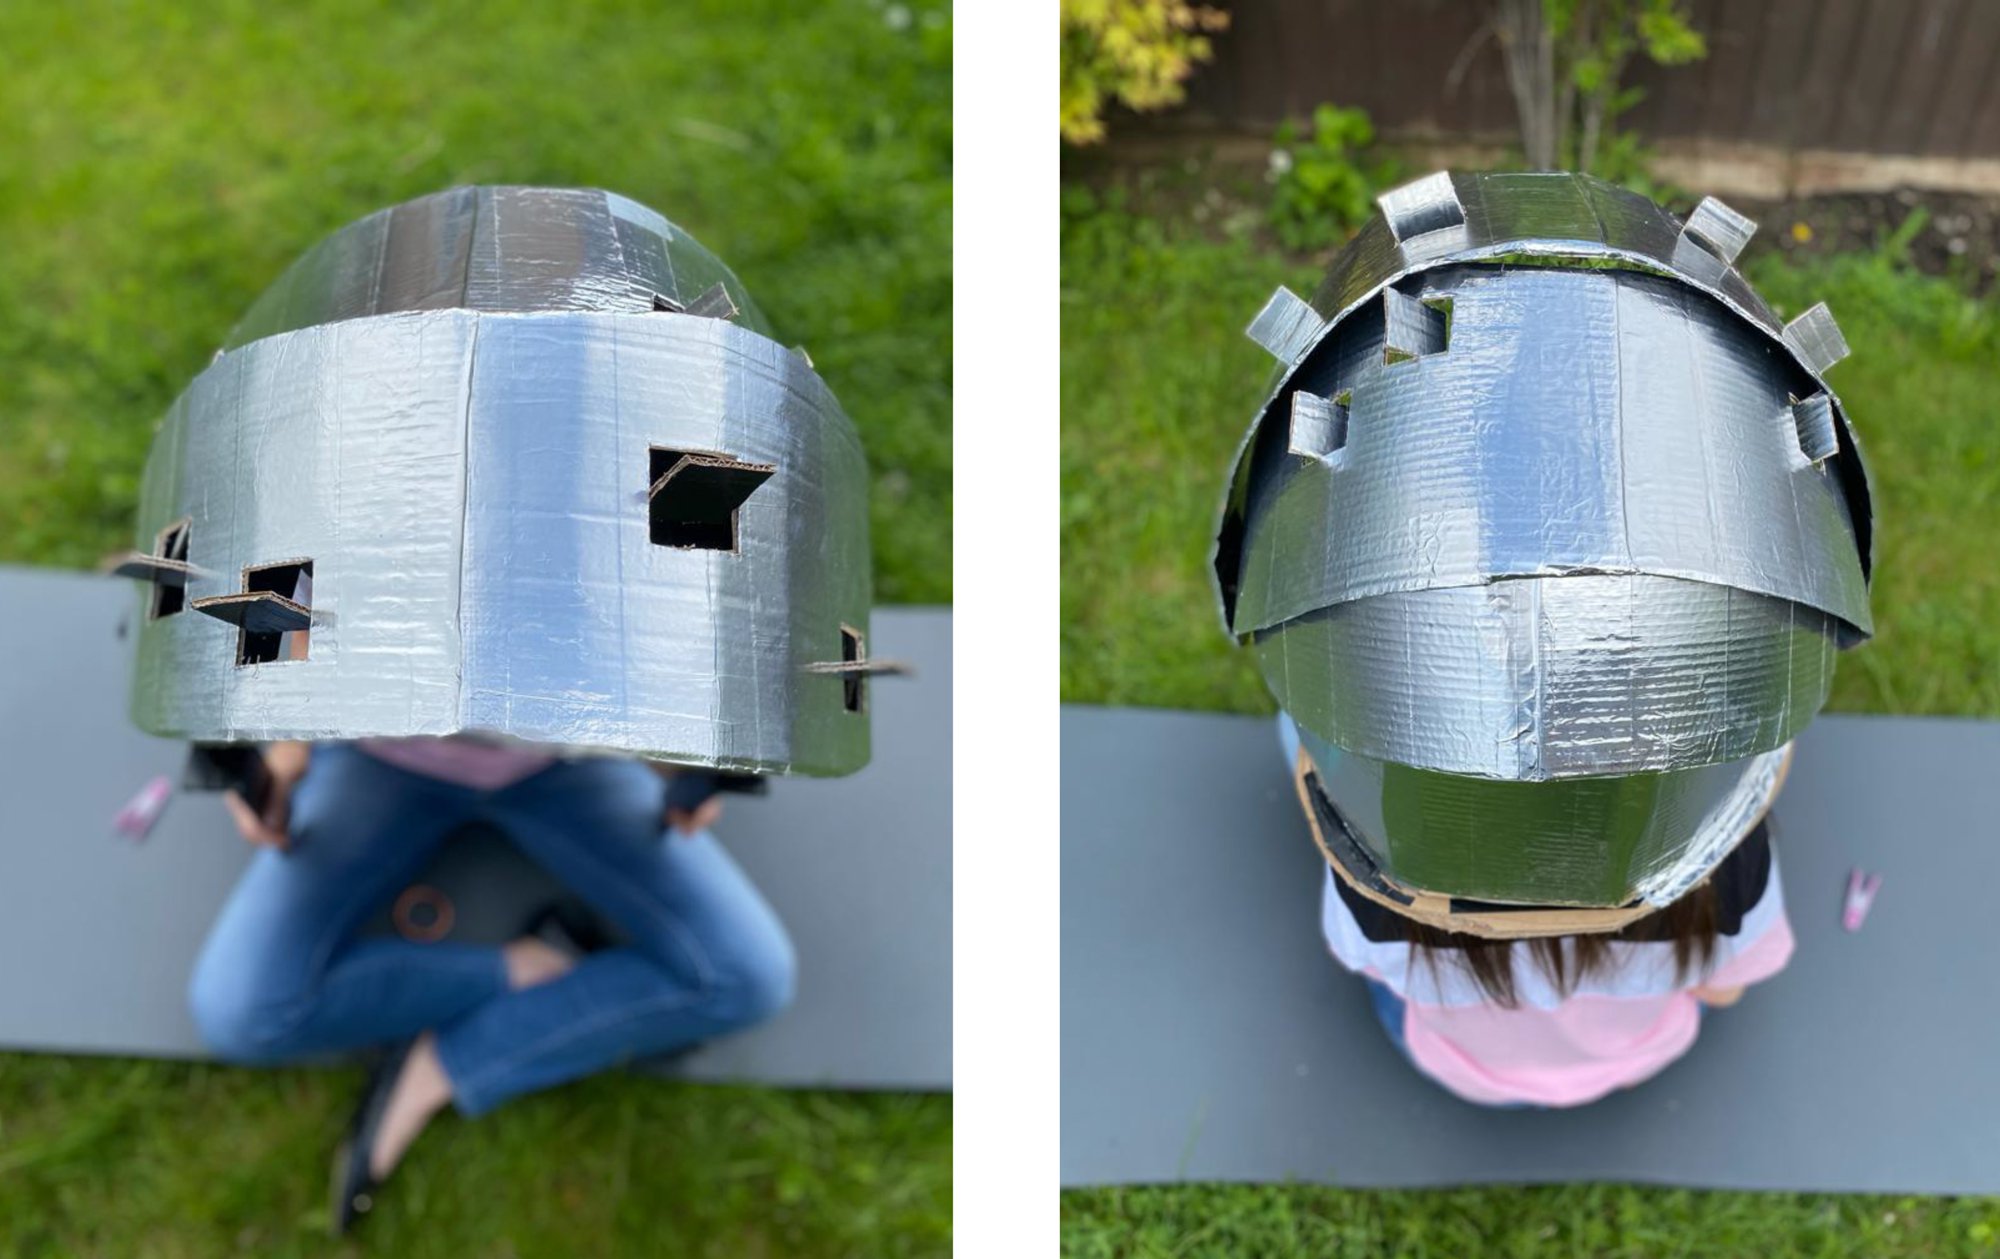 Two images next to each other showing a silvery headpiece worn by a seated student and viewed from above. The headpiece is made from segments that close over the head and has little windows letting the light inside of the helmet